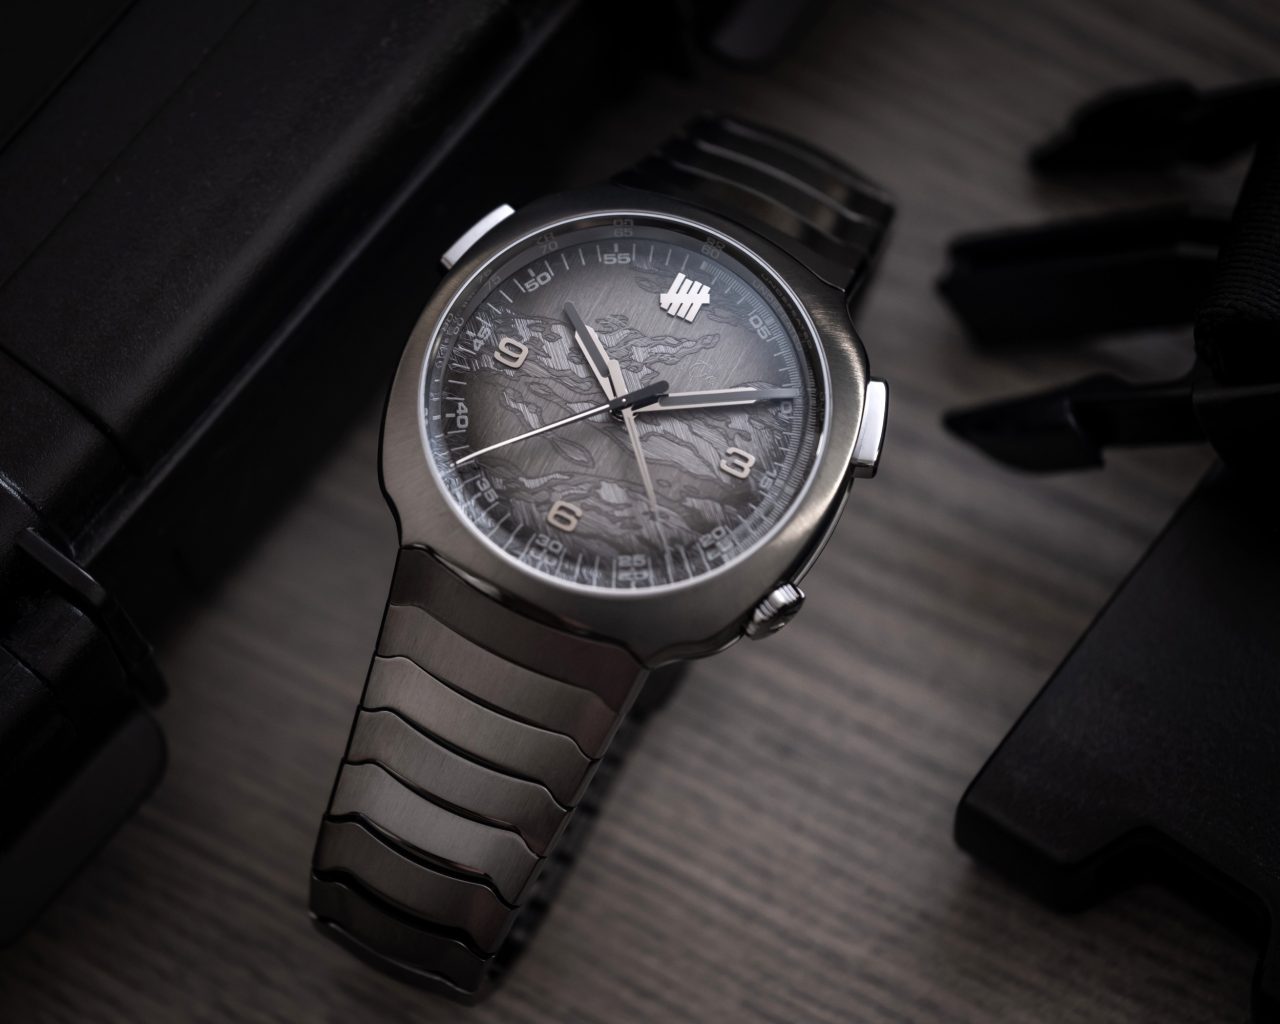 Streamliner Chronograph UNDEFEATED (5)